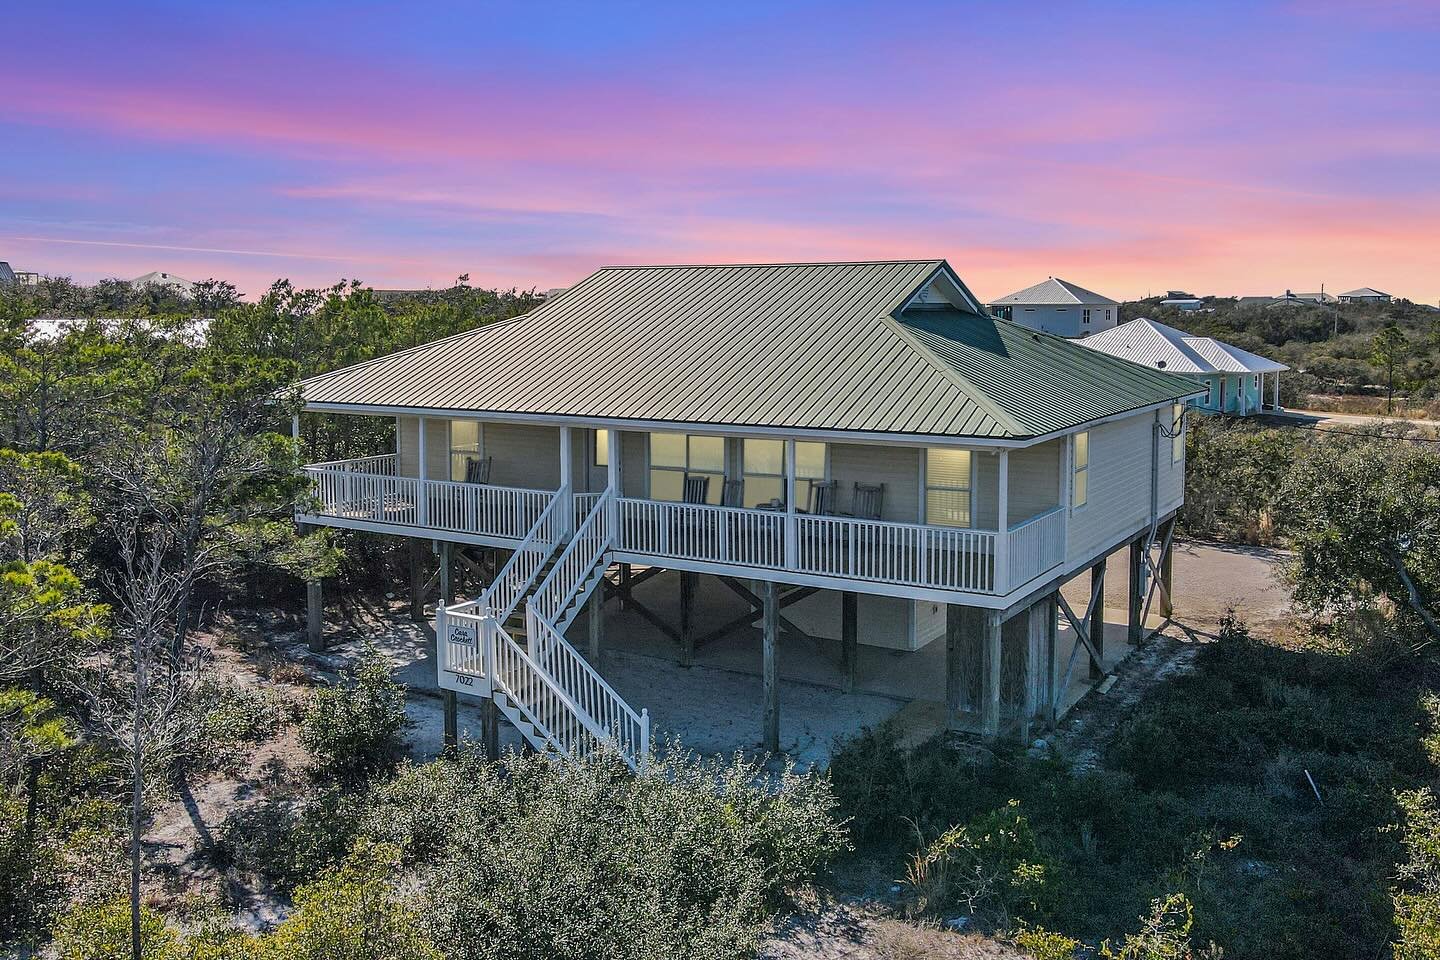 This spacious beach home has been under the Beats Working umbrella for the last five years. Offering 5 bedrooms, 3 baths, a large open concept living space perfect for entertaining the entire family, ample outdoor space, and easy beach access (it&rsq